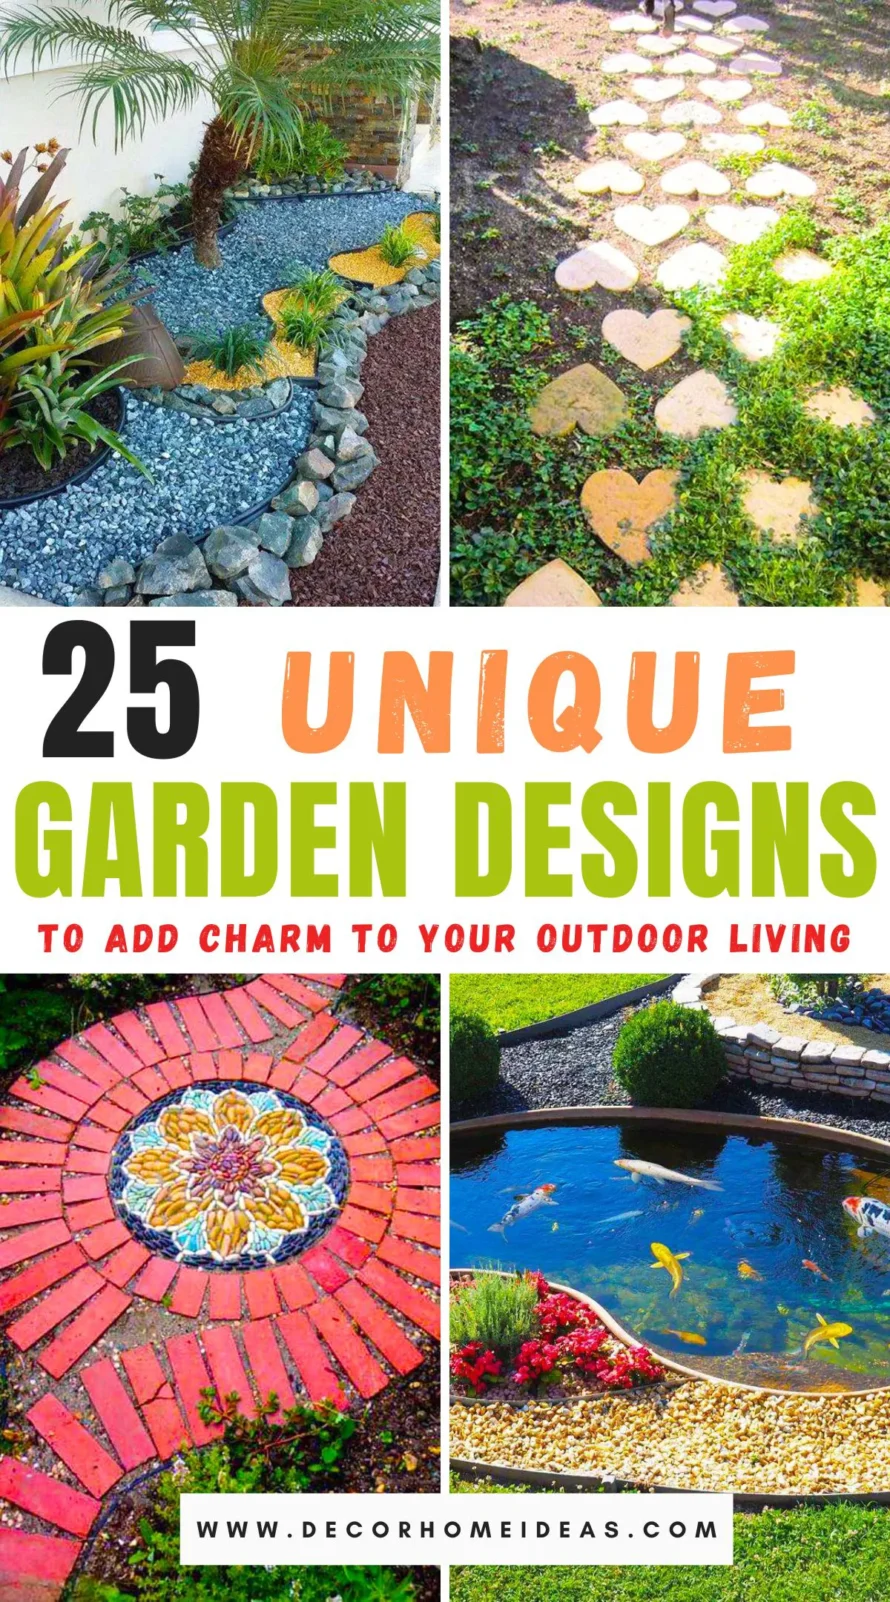 Discover 25 chic garden ideas designed to elevate your home's outdoor space. From stylish seating areas and trendy planters to modern water features and decorative lighting, these ideas add flair and sophistication to any garden. Whether you're aiming for a minimalist look or a lush oasis, these chic garden designs strike the perfect balance between aesthetics and functionality, creating an inviting atmosphere for outdoor relaxation and entertainment.